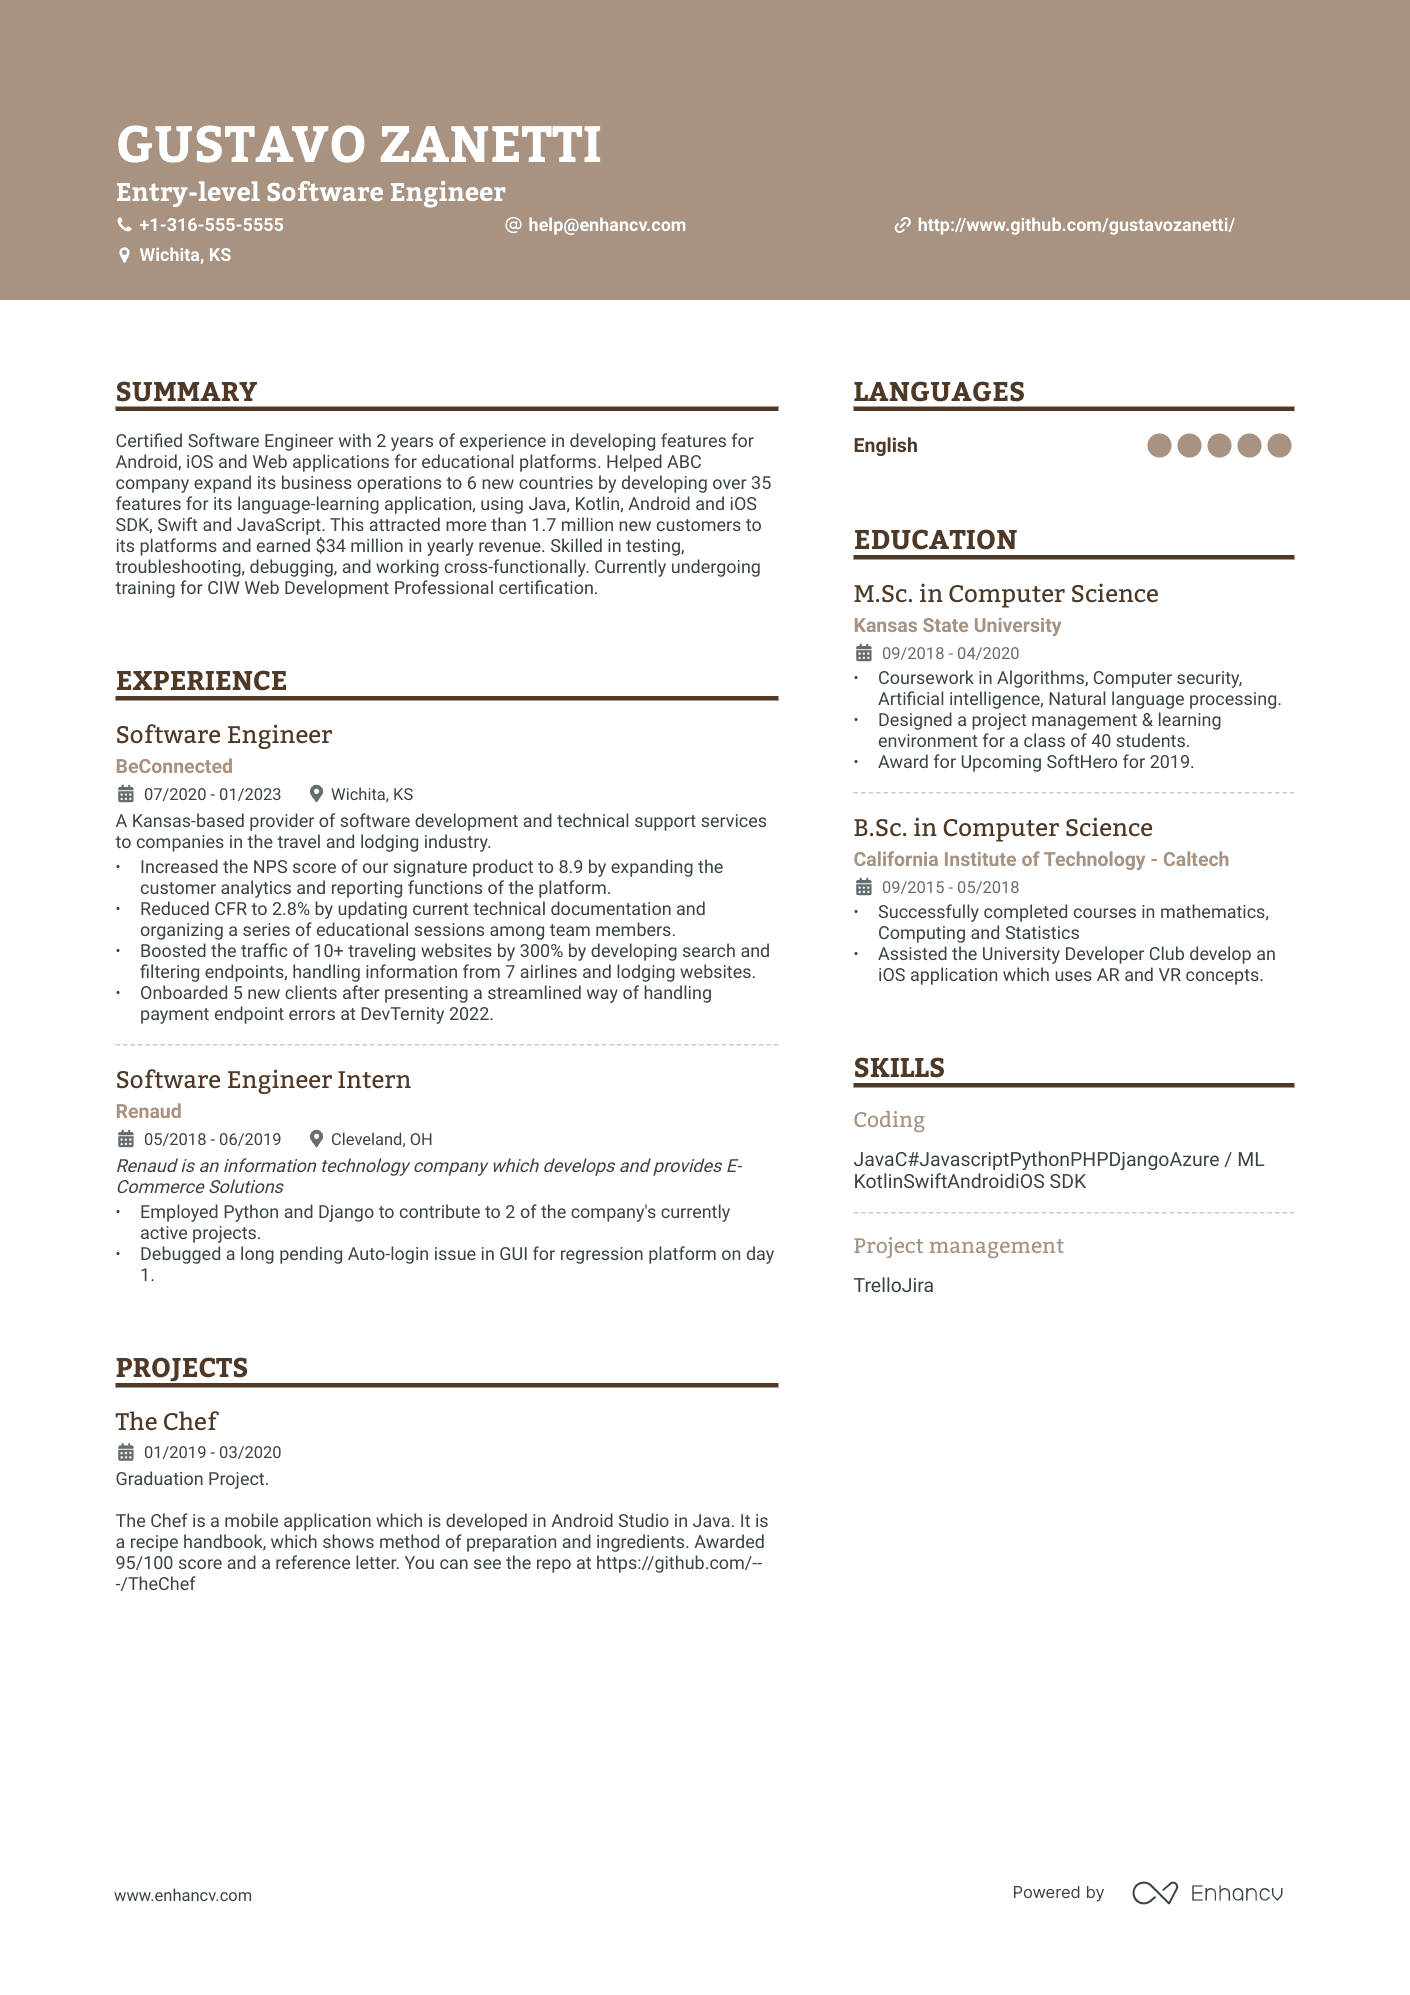 Entry Level Software Engineer resume example